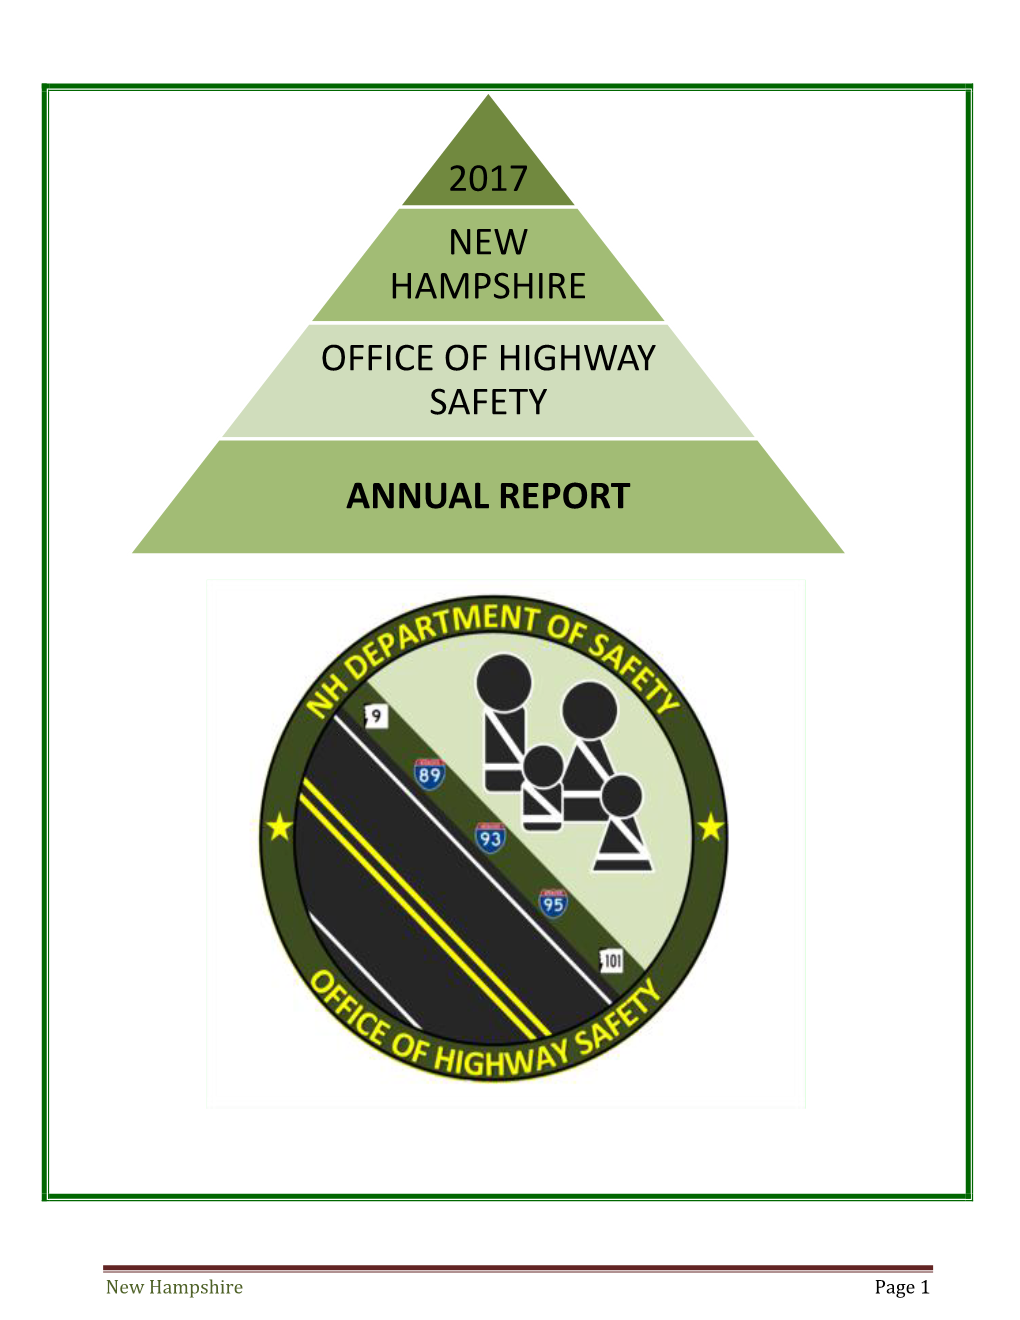 New Hampshire Office of Highway Safety